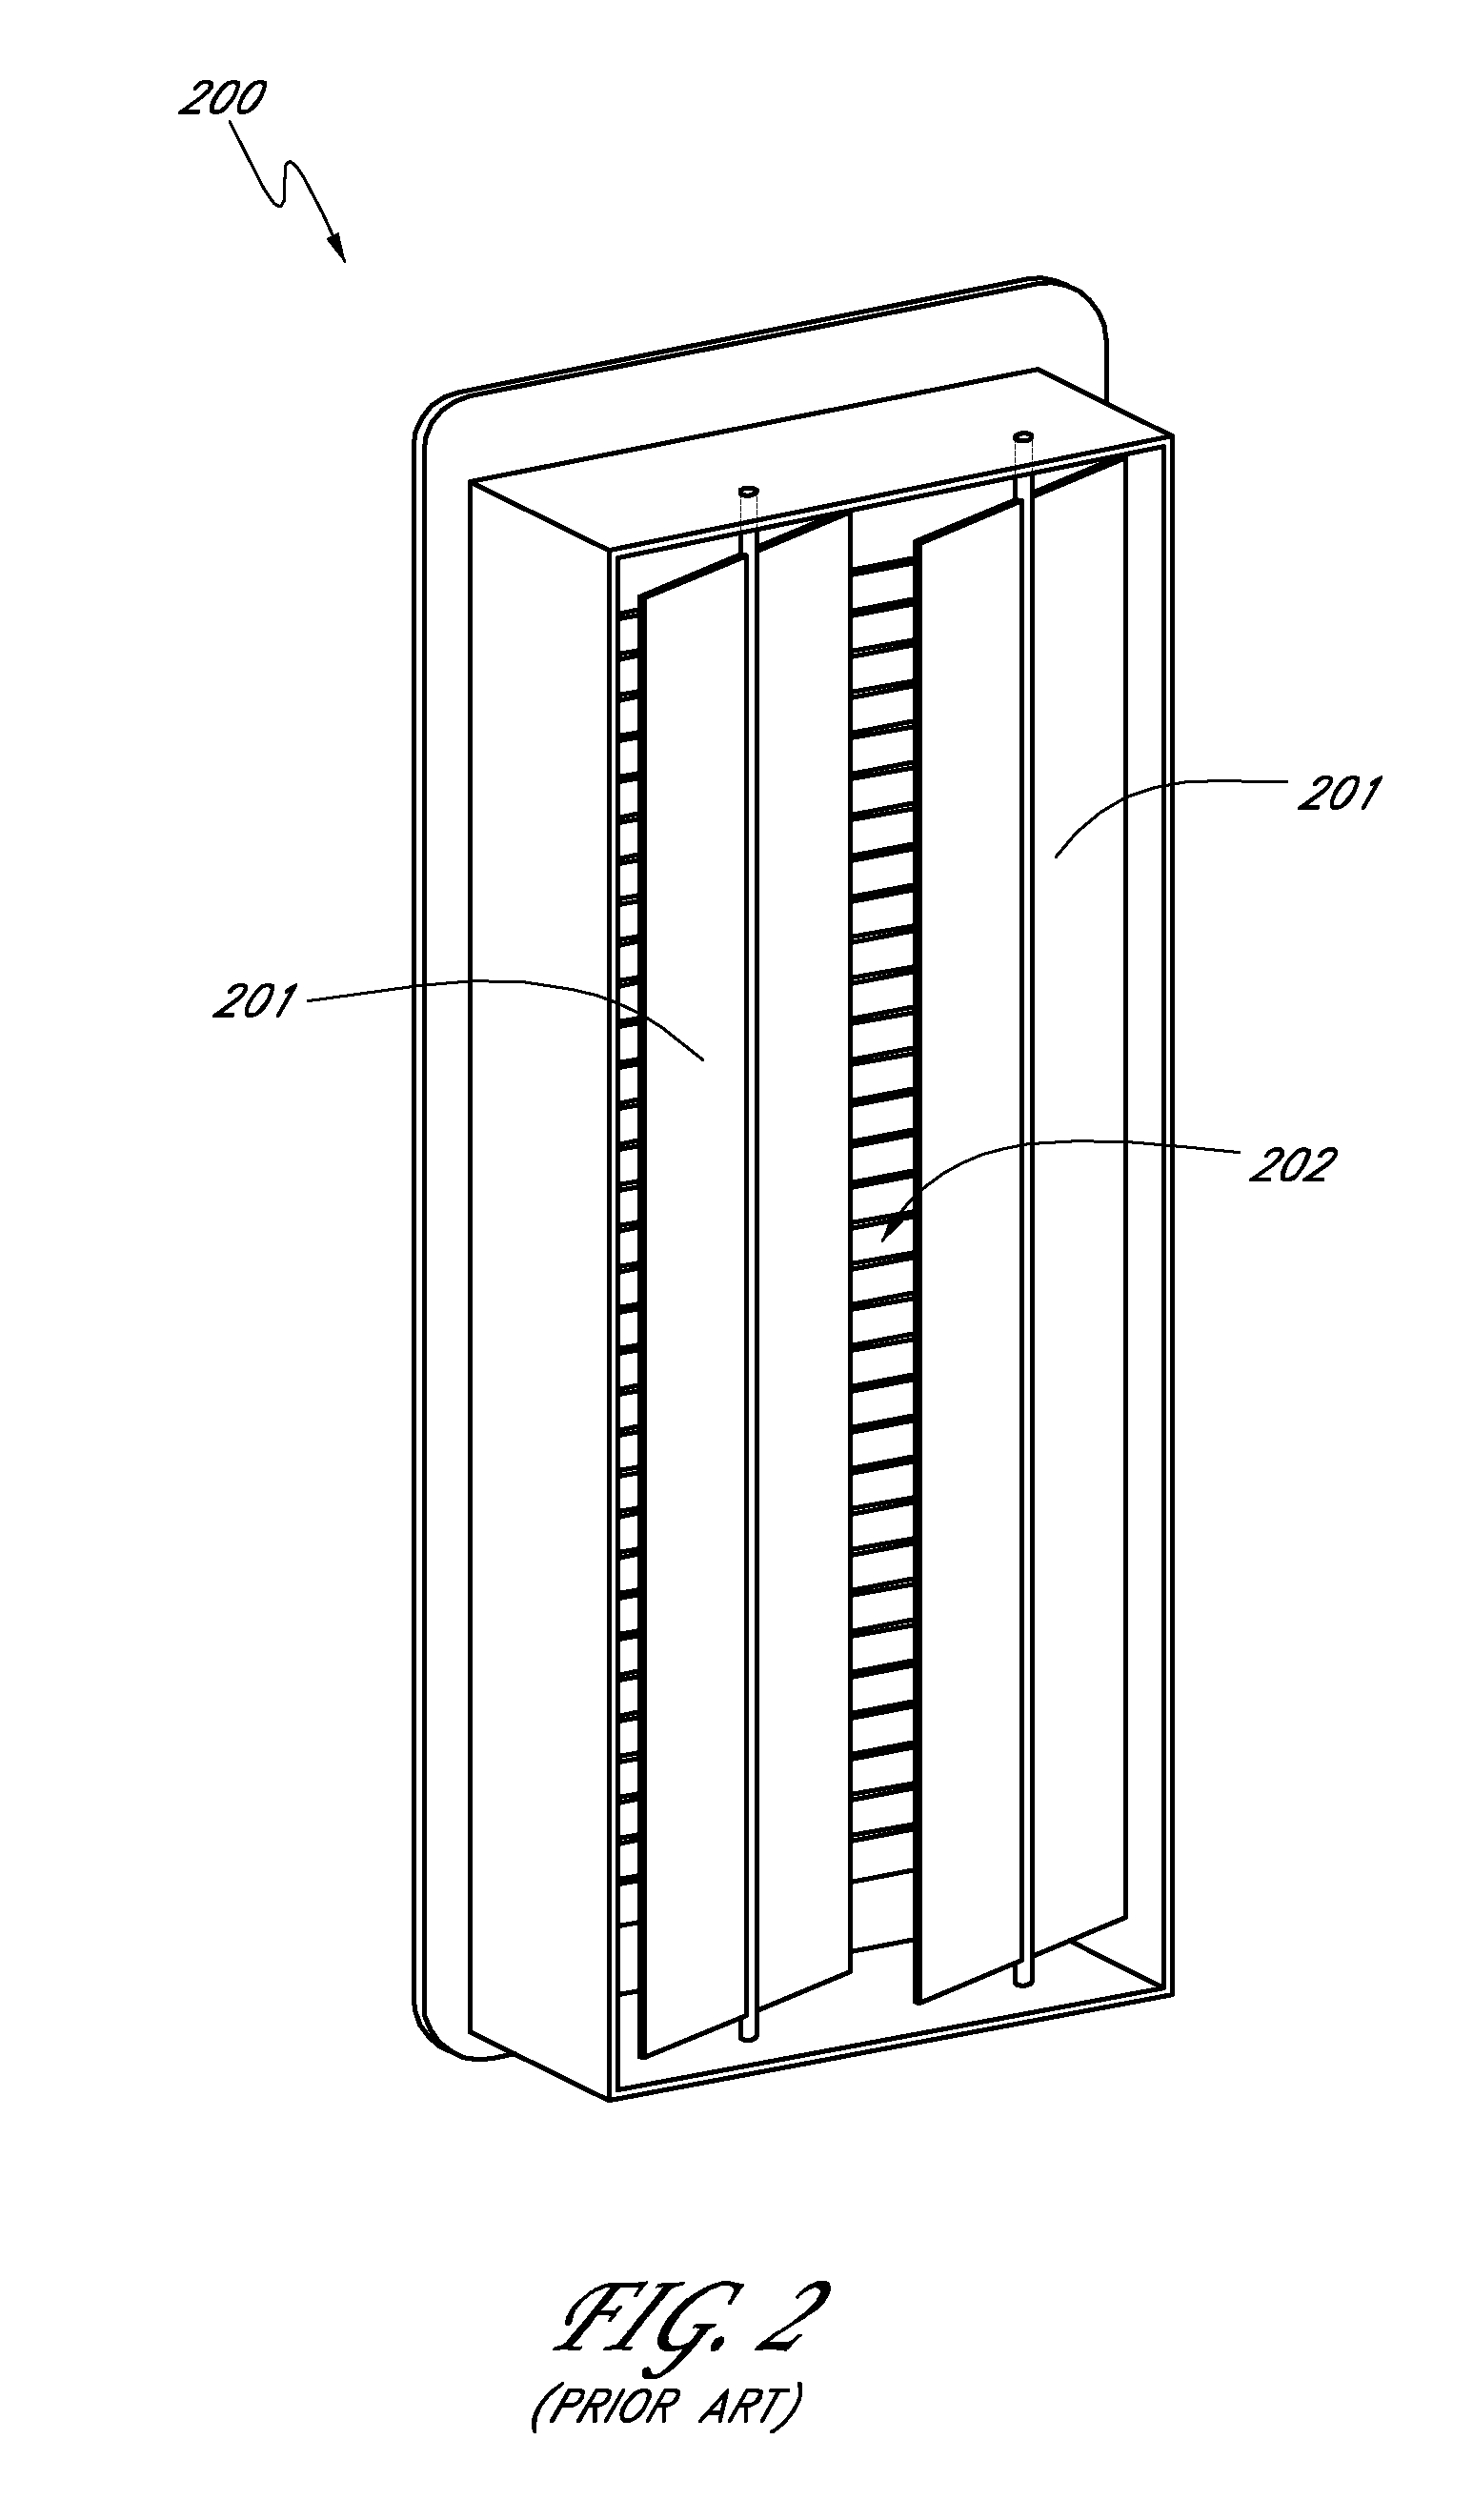 Modular register vent for zone heating and cooling